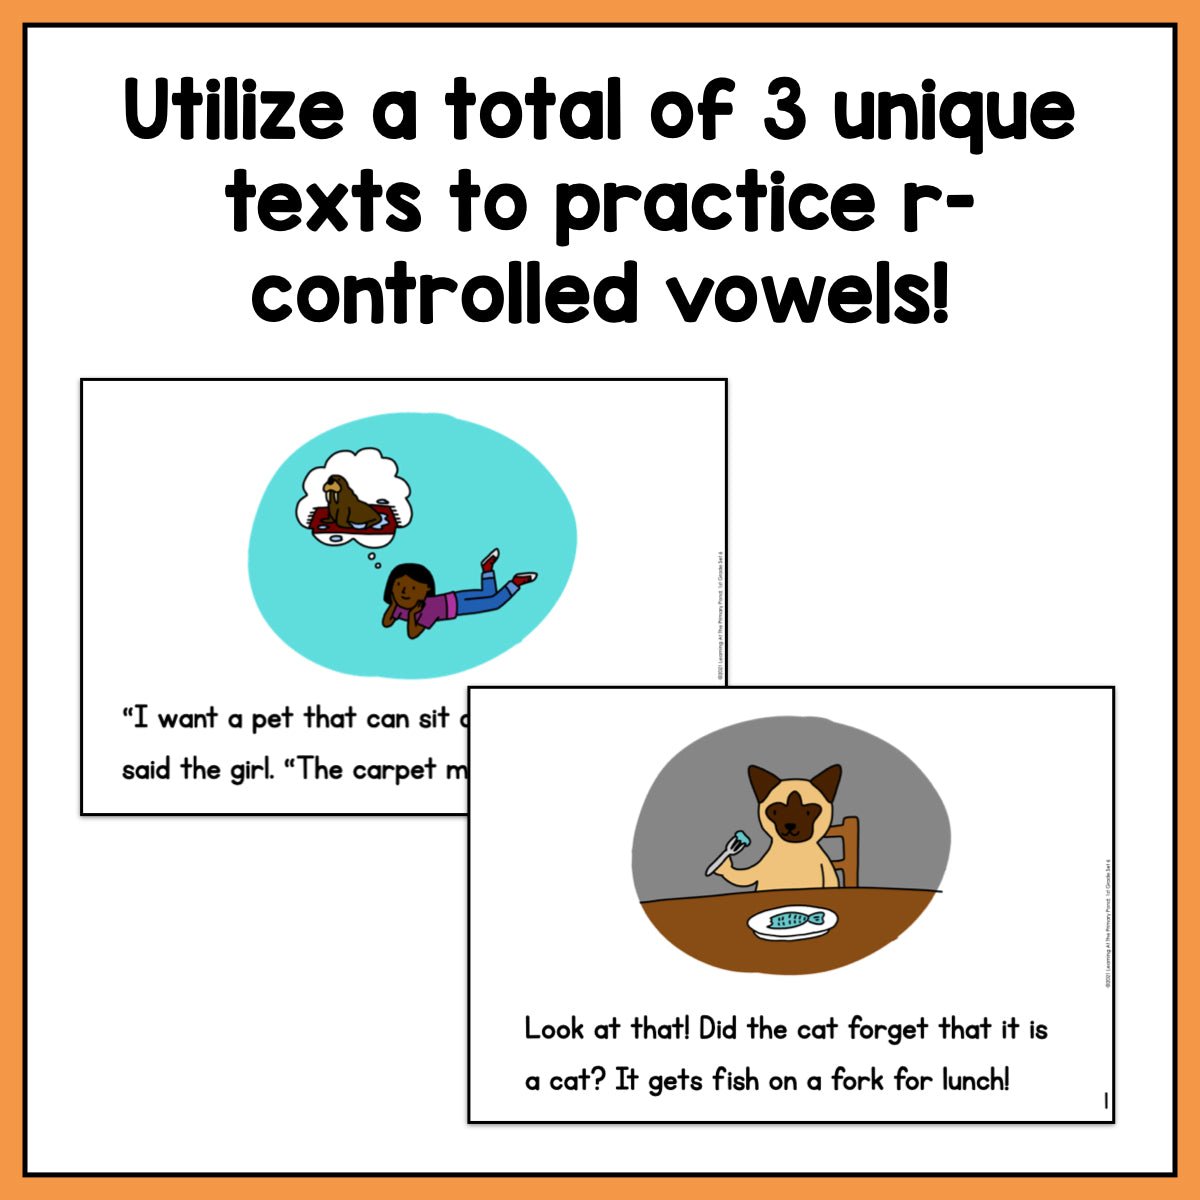 Decodable Readers | R-Controlled Vowels AR, ER, OR, IR, UR | First Grade Set 6 - learning-at-the-primary-pond